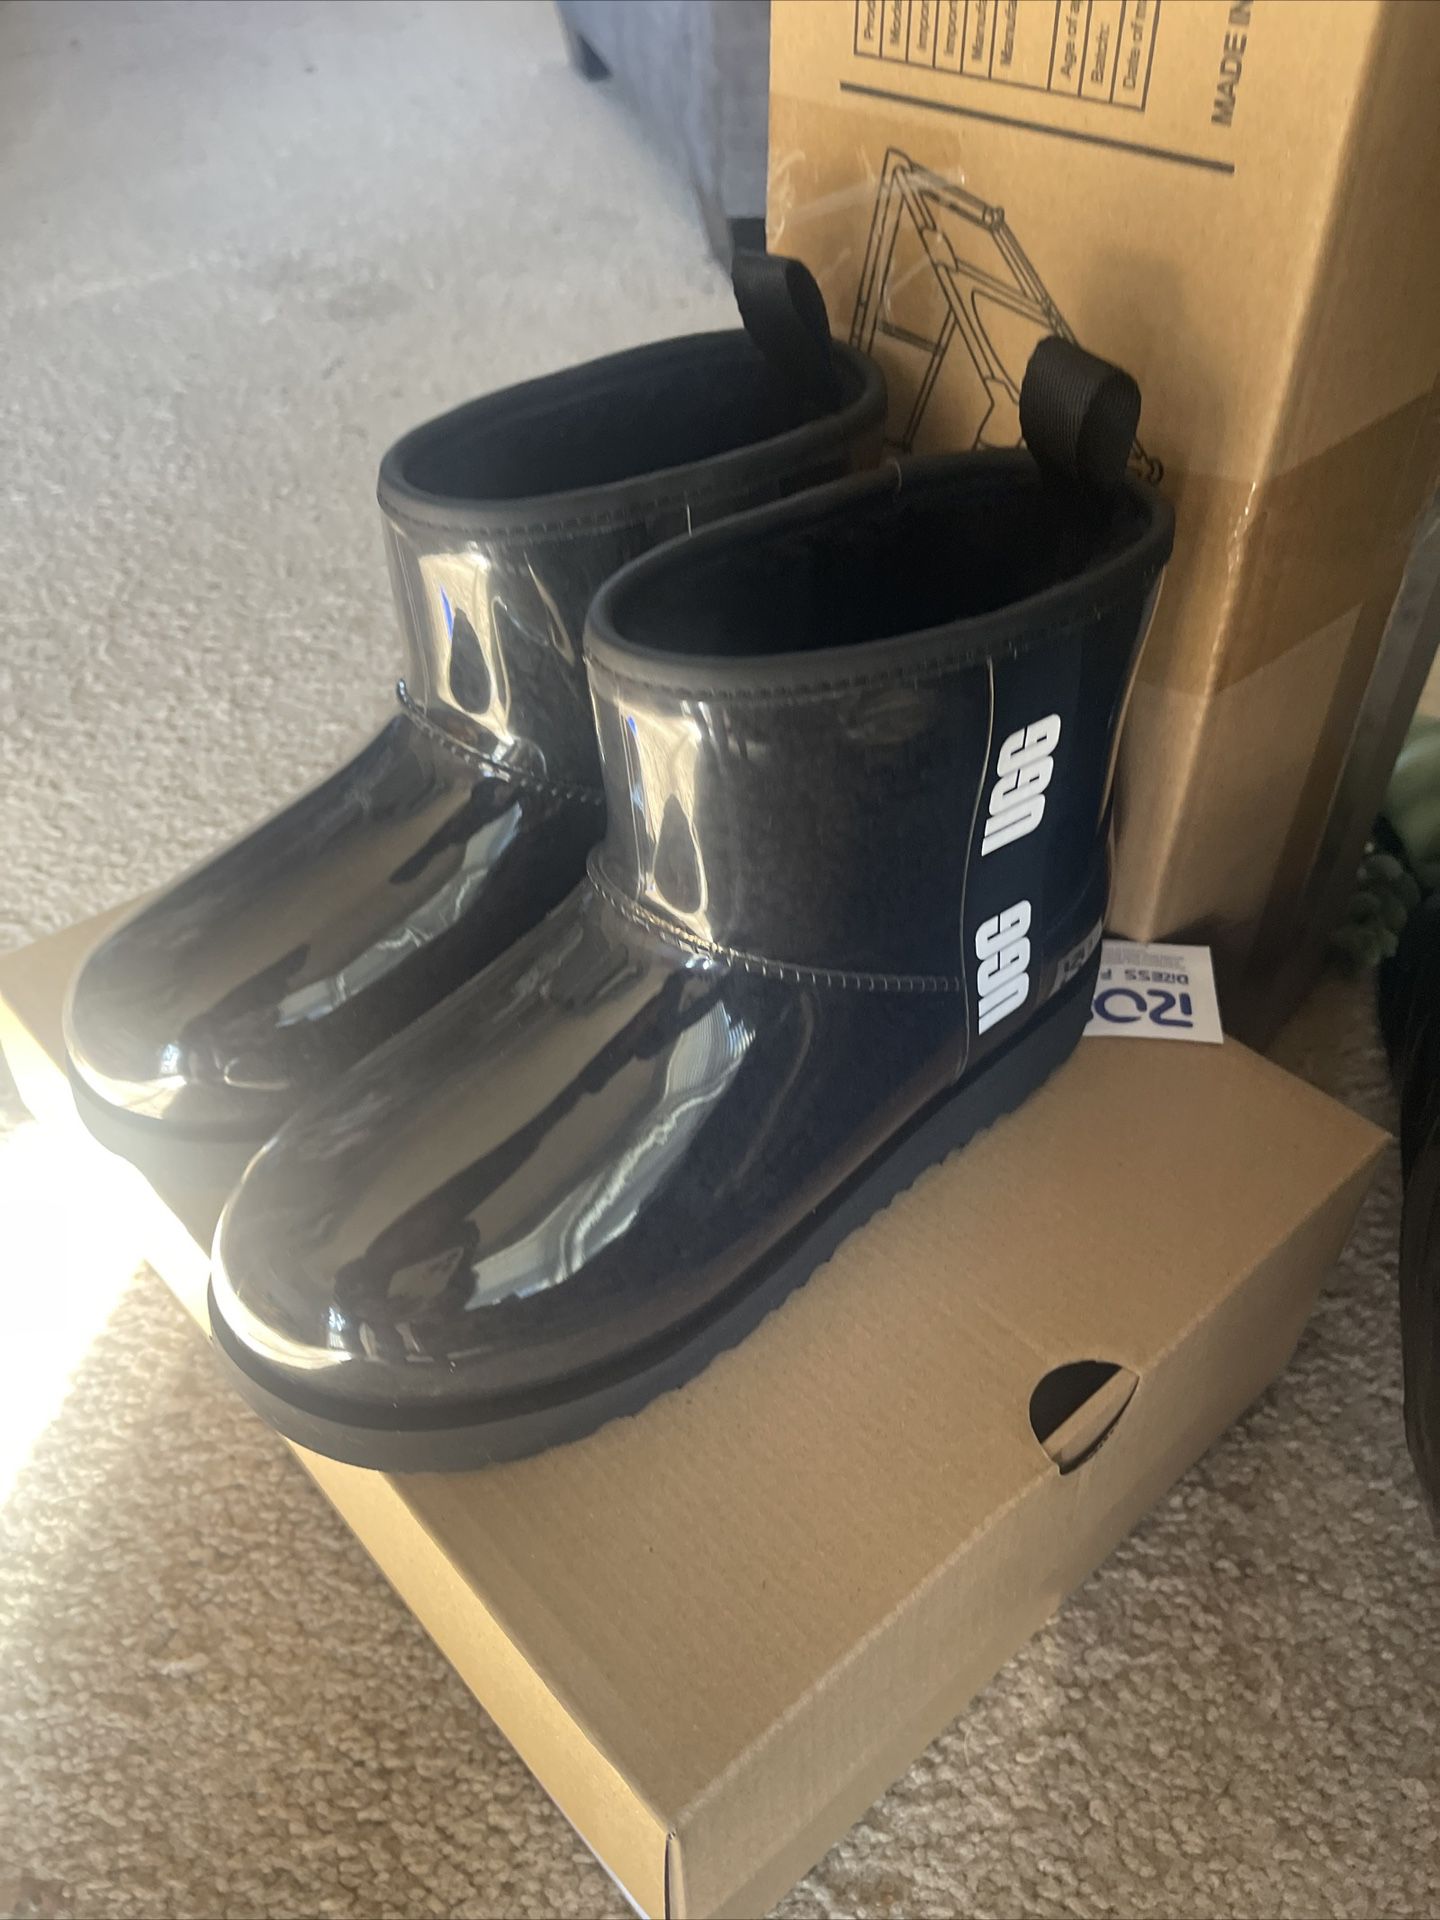 UGG Boots Black Waterproof NEW without Tags or Box  Size 6 38 1112386K